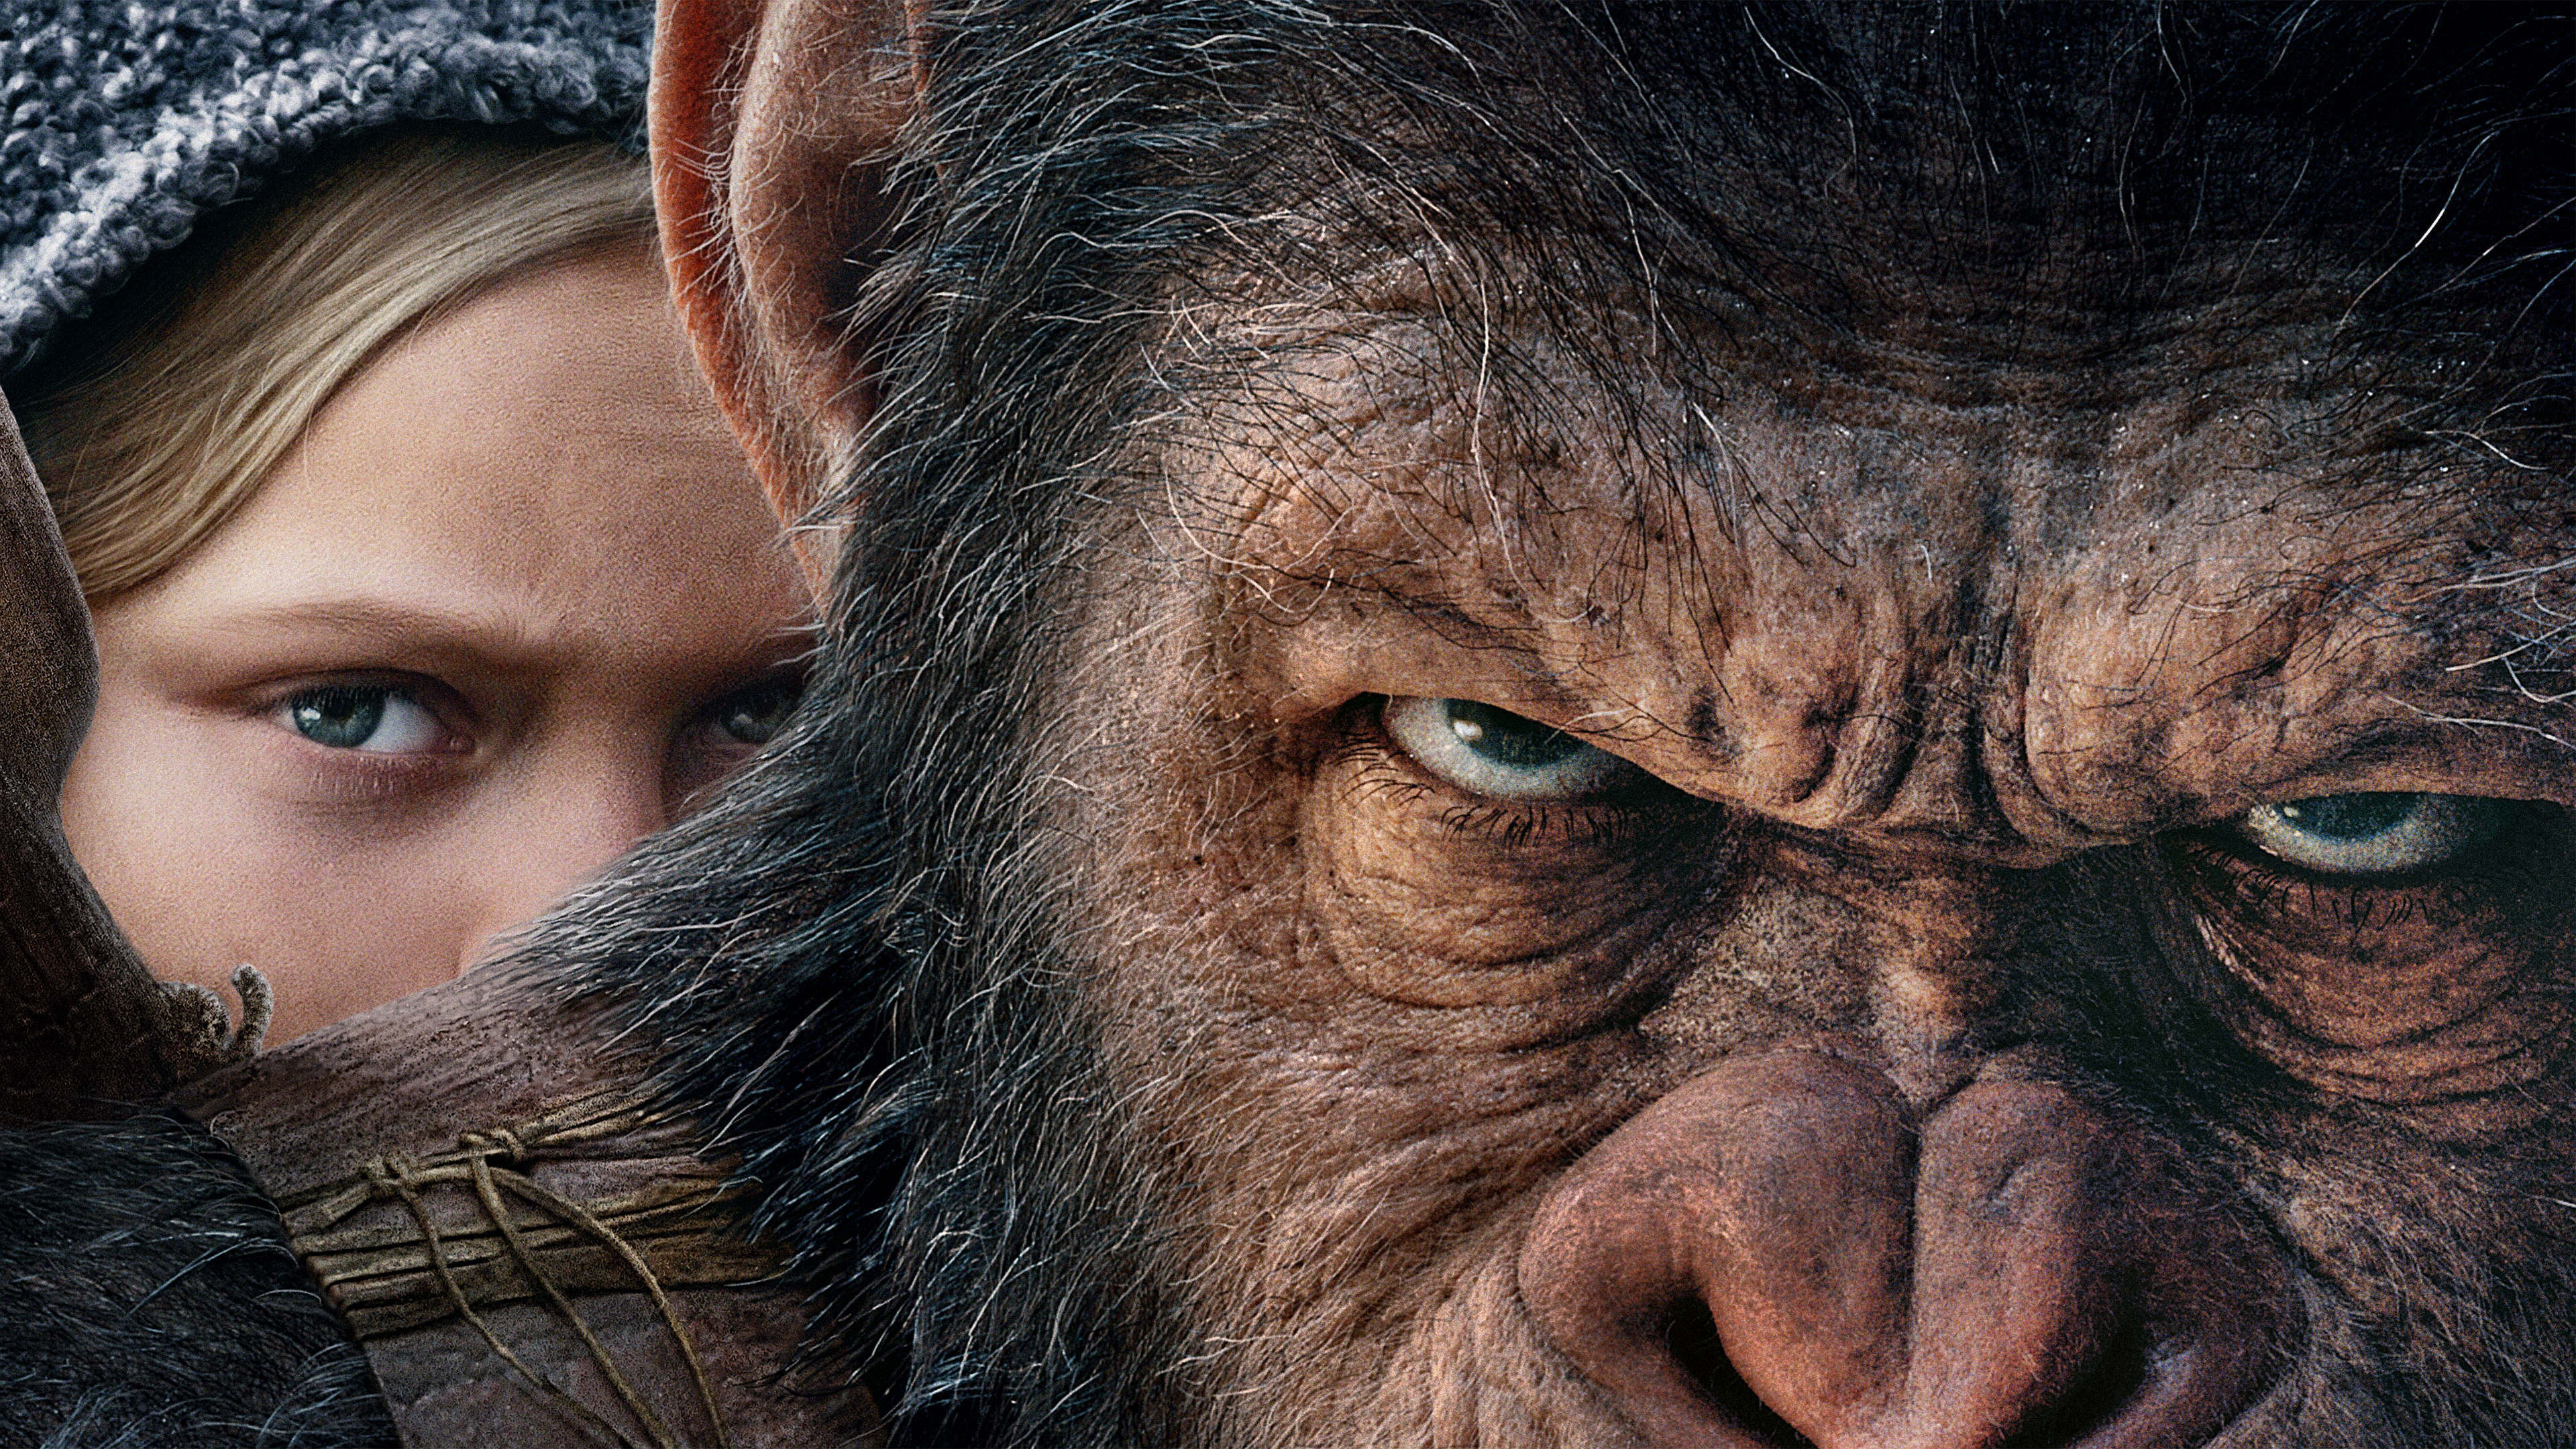 War for the Planet of the Apes, HD wallpapers, Ape revolution, 3840x2160 4K Desktop